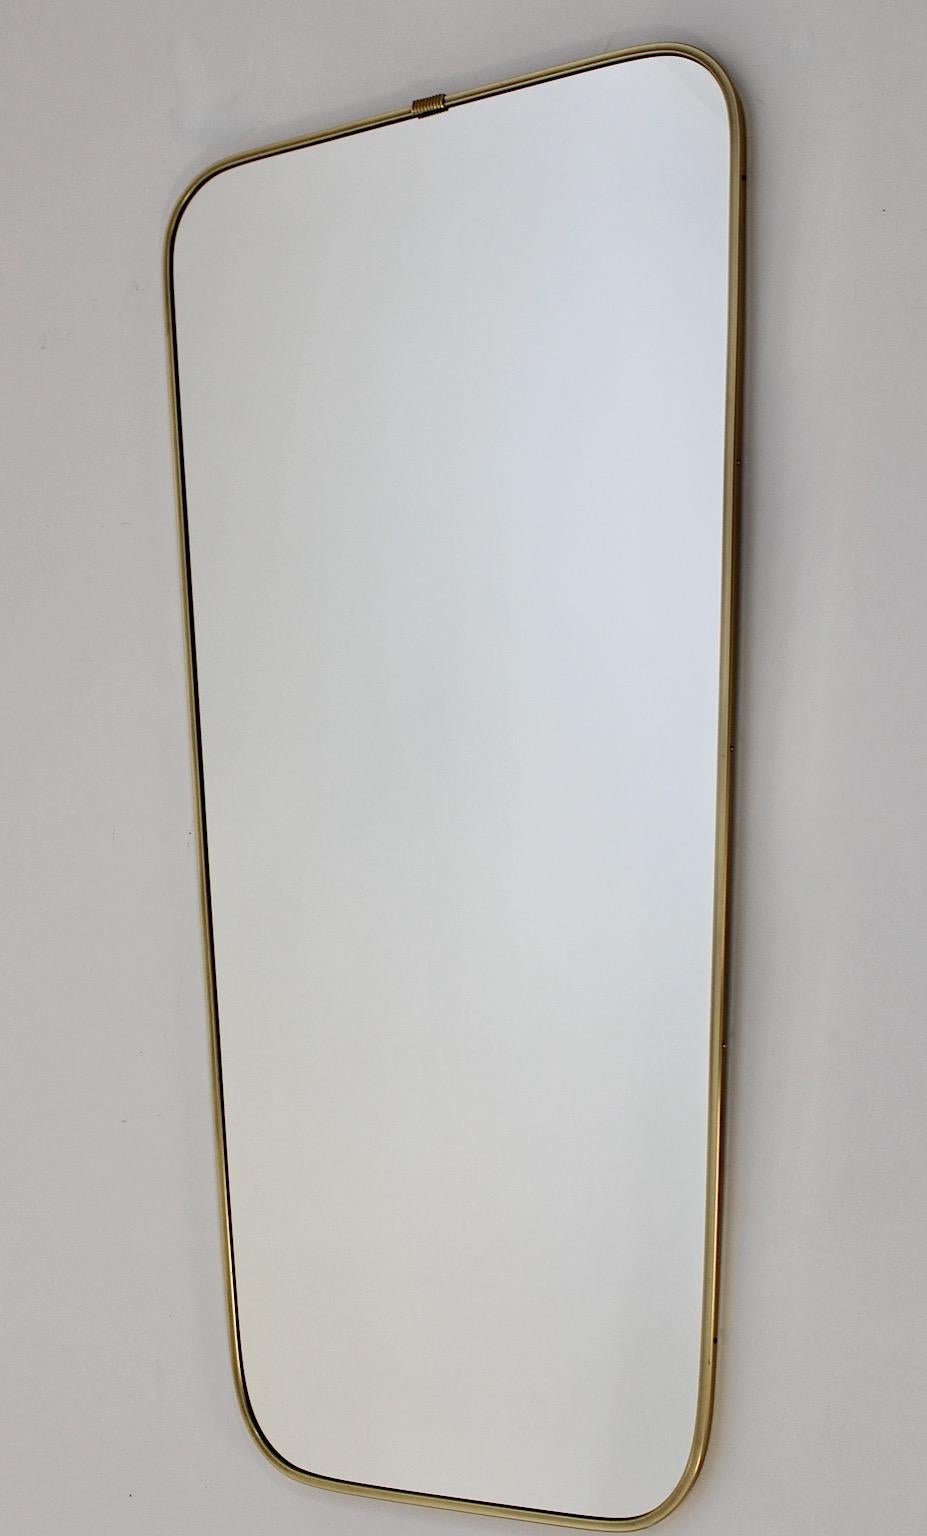 Mid Century Modern Modernist vintage brass full length mirror floor mirror 1950s Italy.
A stunning modernist sleek vintage floor mirror with a subtle brass golden frame
in a slightly conical shape.
This full length mirror from the 1950s shows a warm